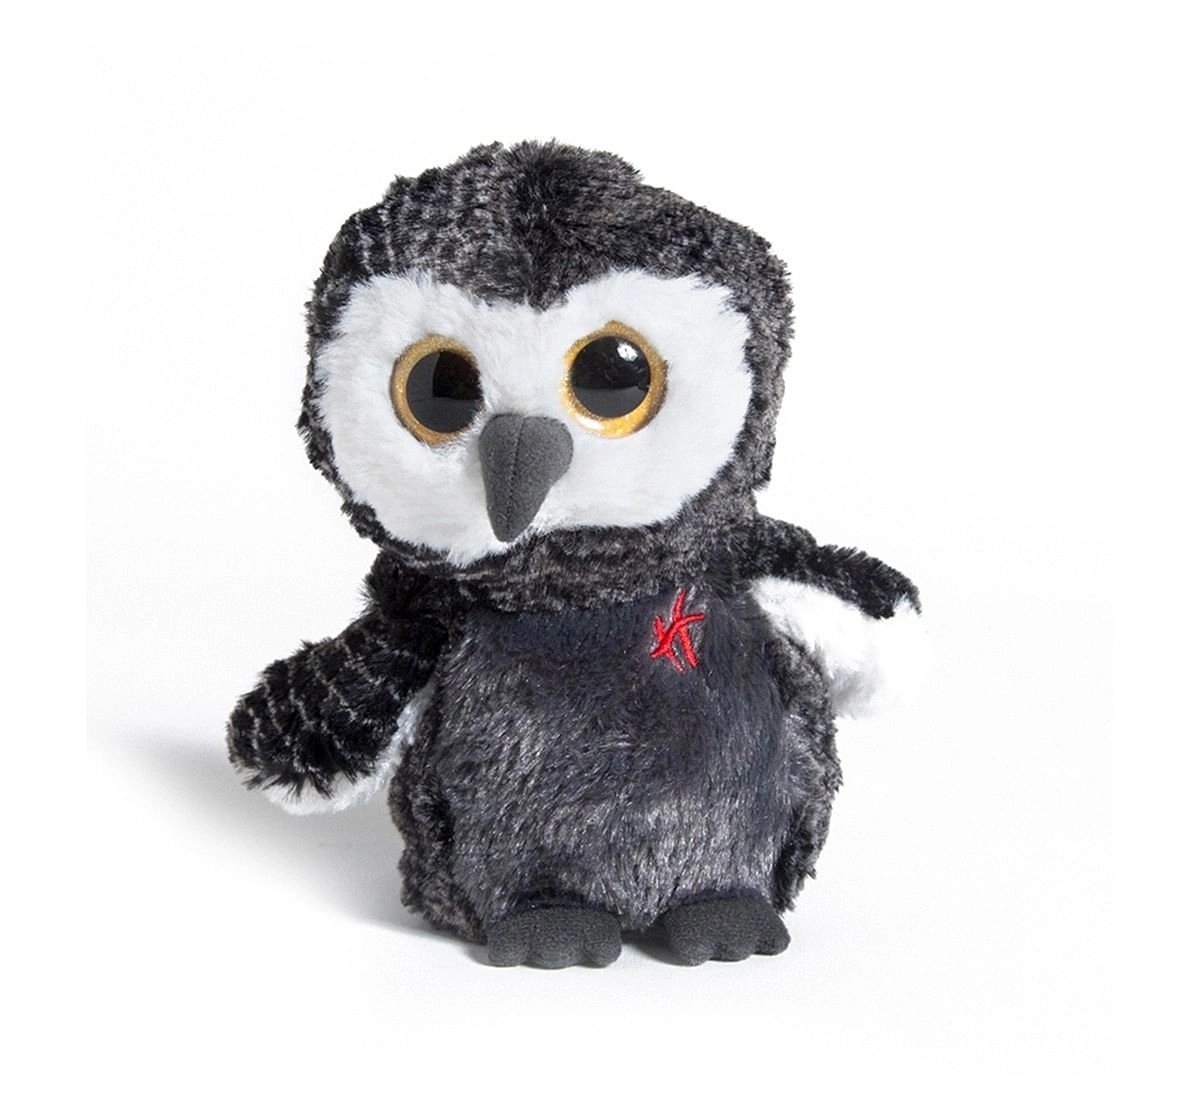  Hamleys Movers & Shakers Happy Pals Owl Interactive Soft Toys for Kids age 18M + - 17 Cm 